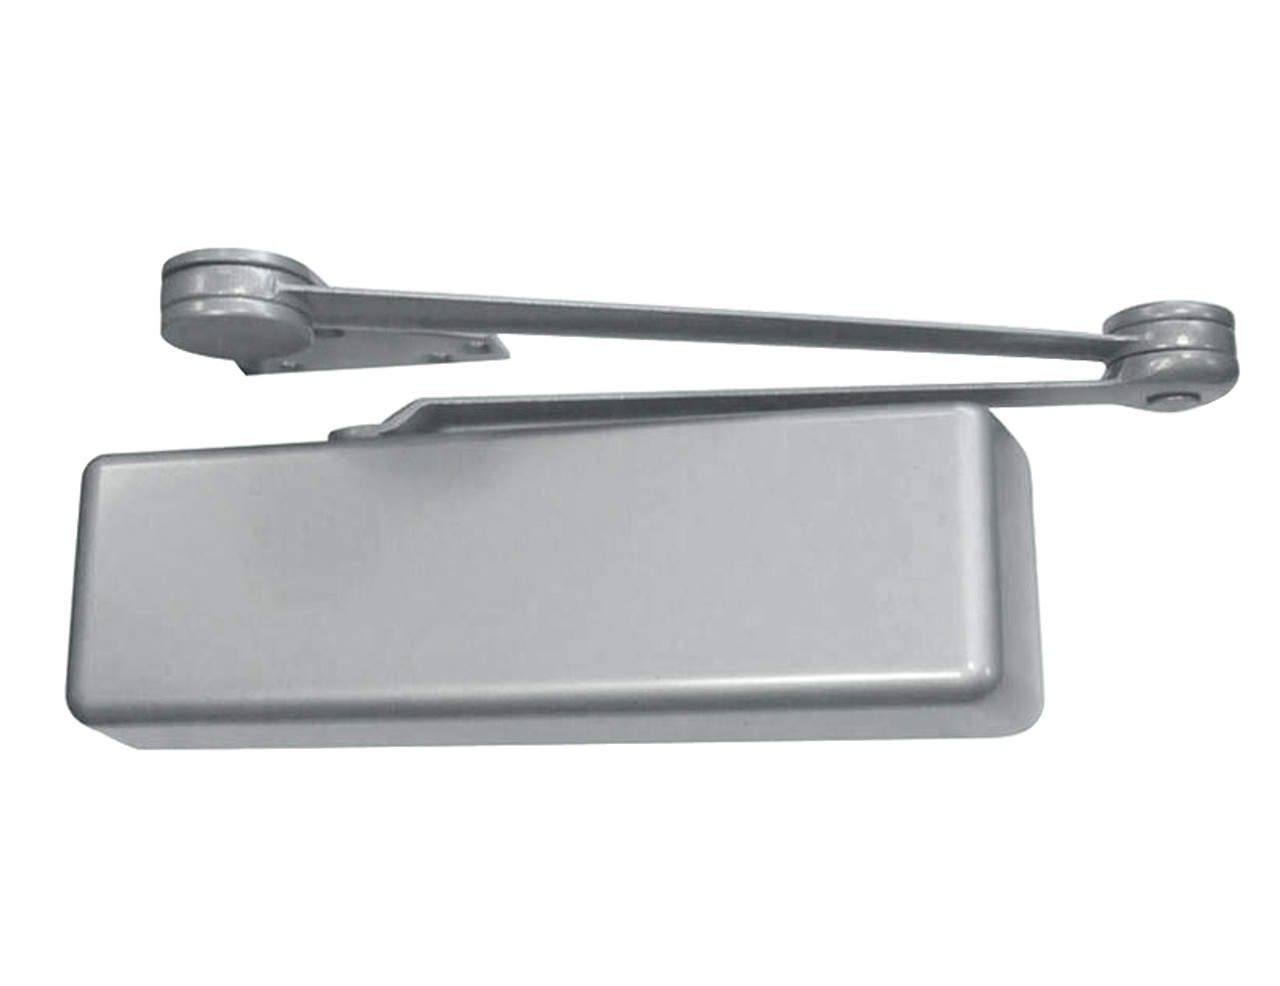 4211T-STD-LH-US26D LCN Door Closer with Standard Arm in Satin Chrome Finish